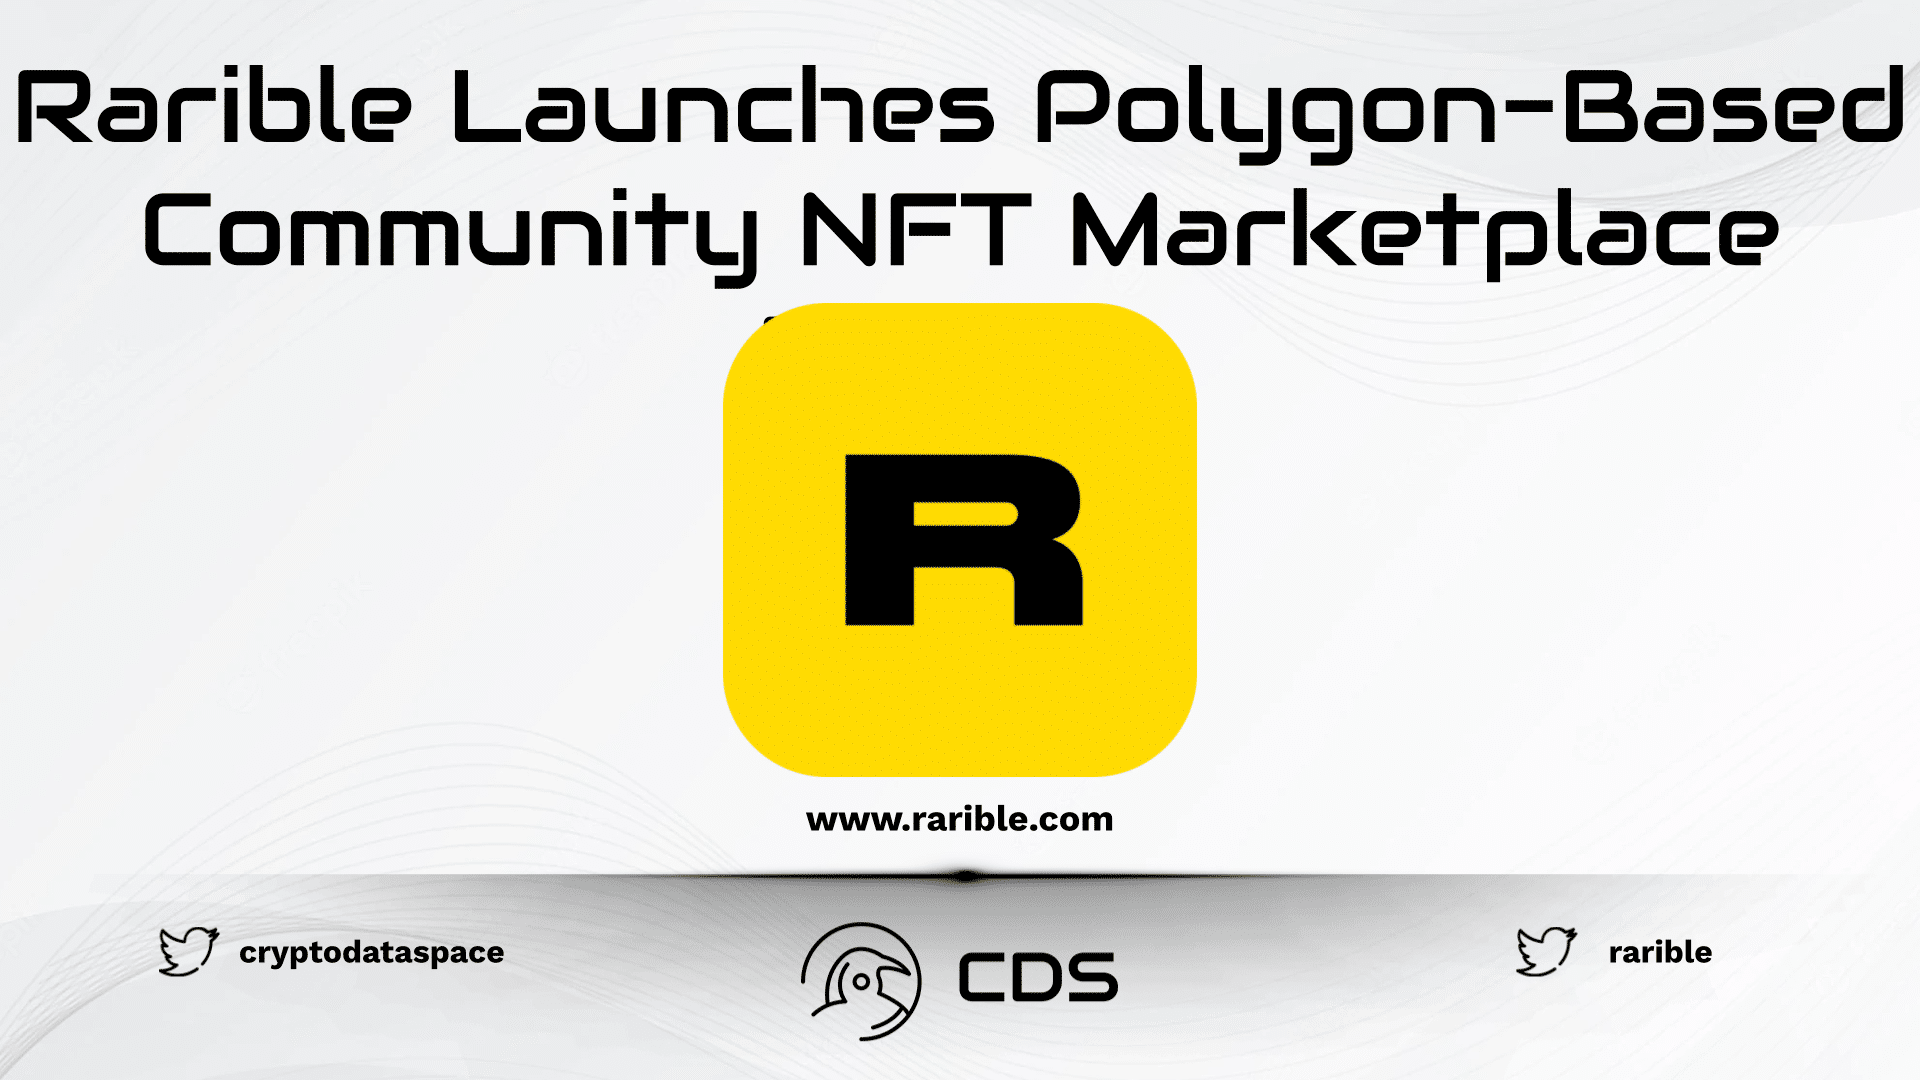 Rarible Launches Polygon-Based Community NFT Marketplace Builder